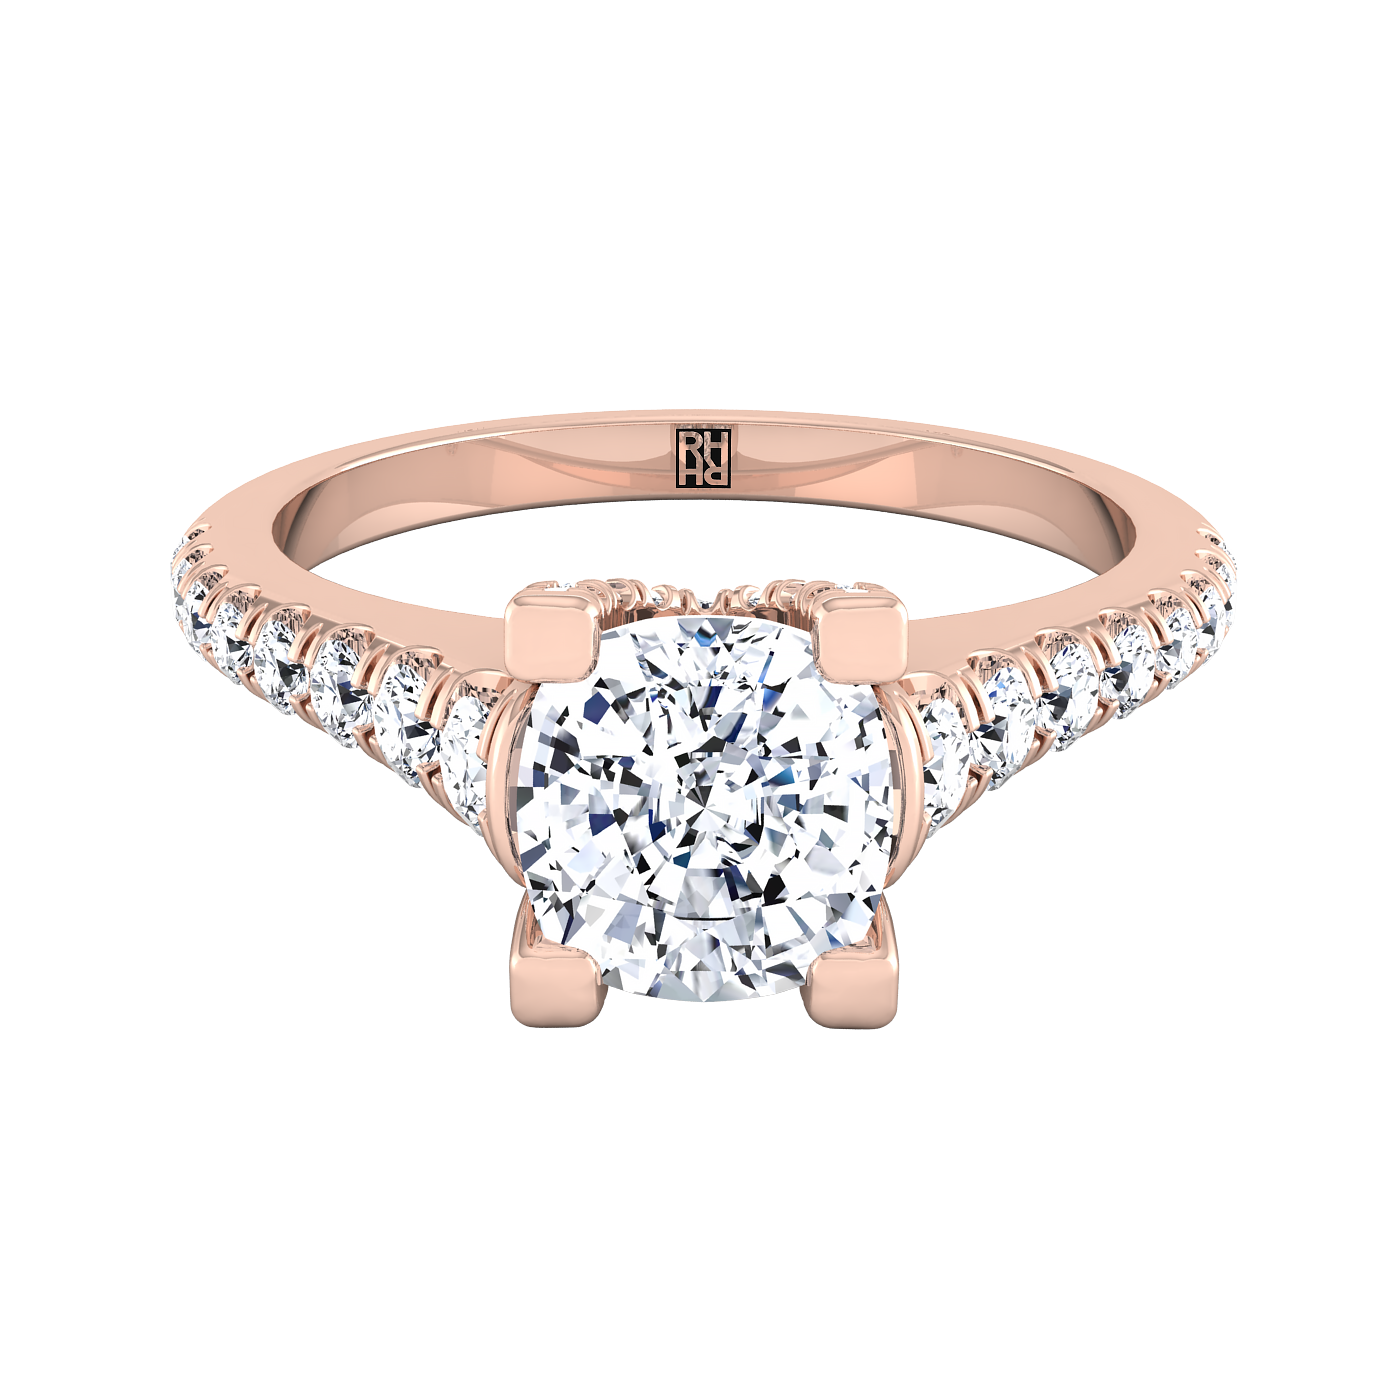 14K Rose Gold Cushion Diamond Pave Prong Linear Engagement Ring -1/2ctw